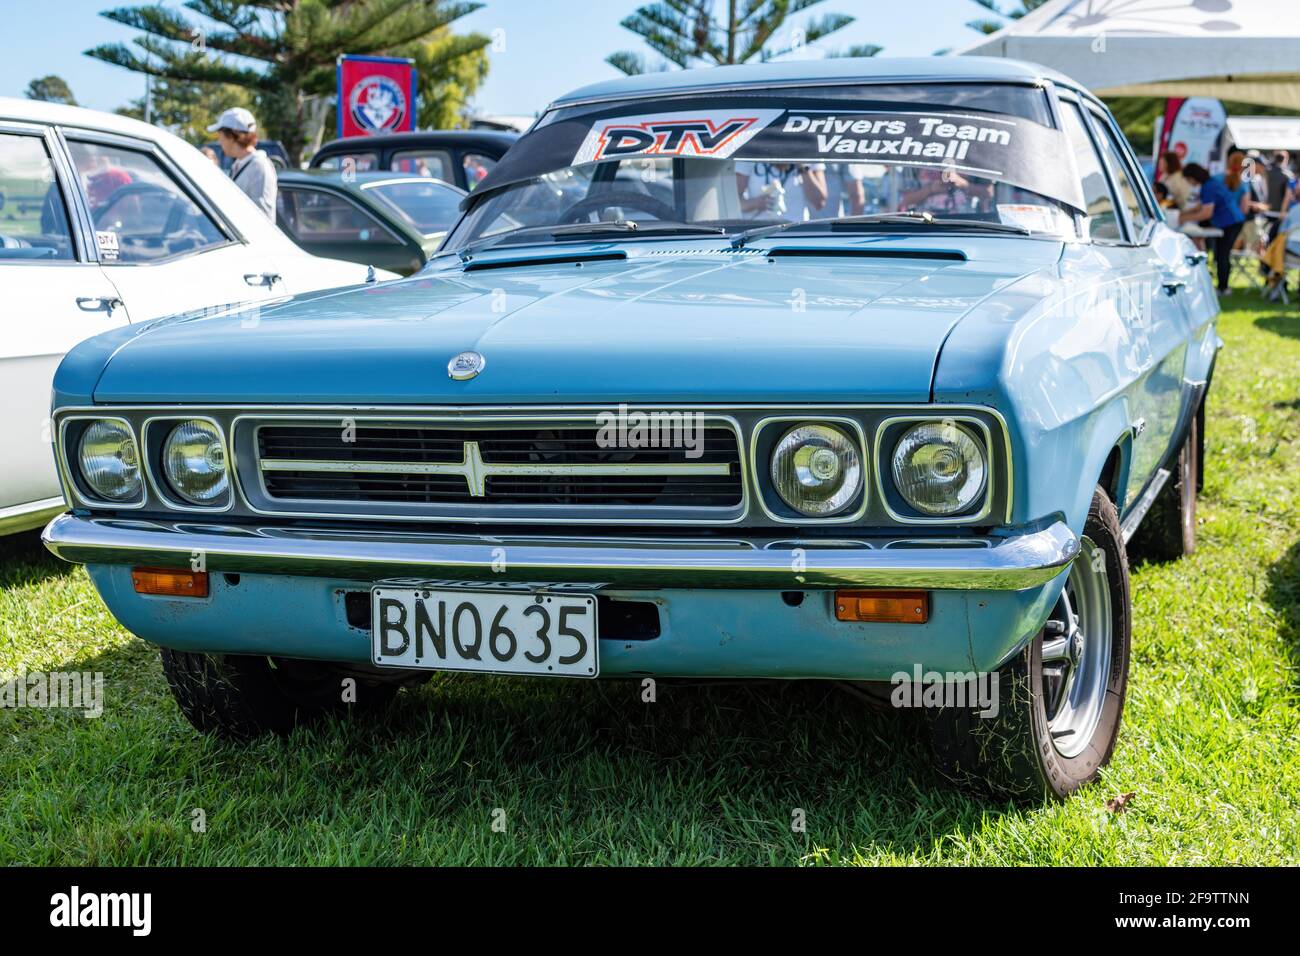 AUCKLAND, NEW ZEALAND - Apr 17, 2021: View of Vauxhall Victor VX classic car Stock Photo